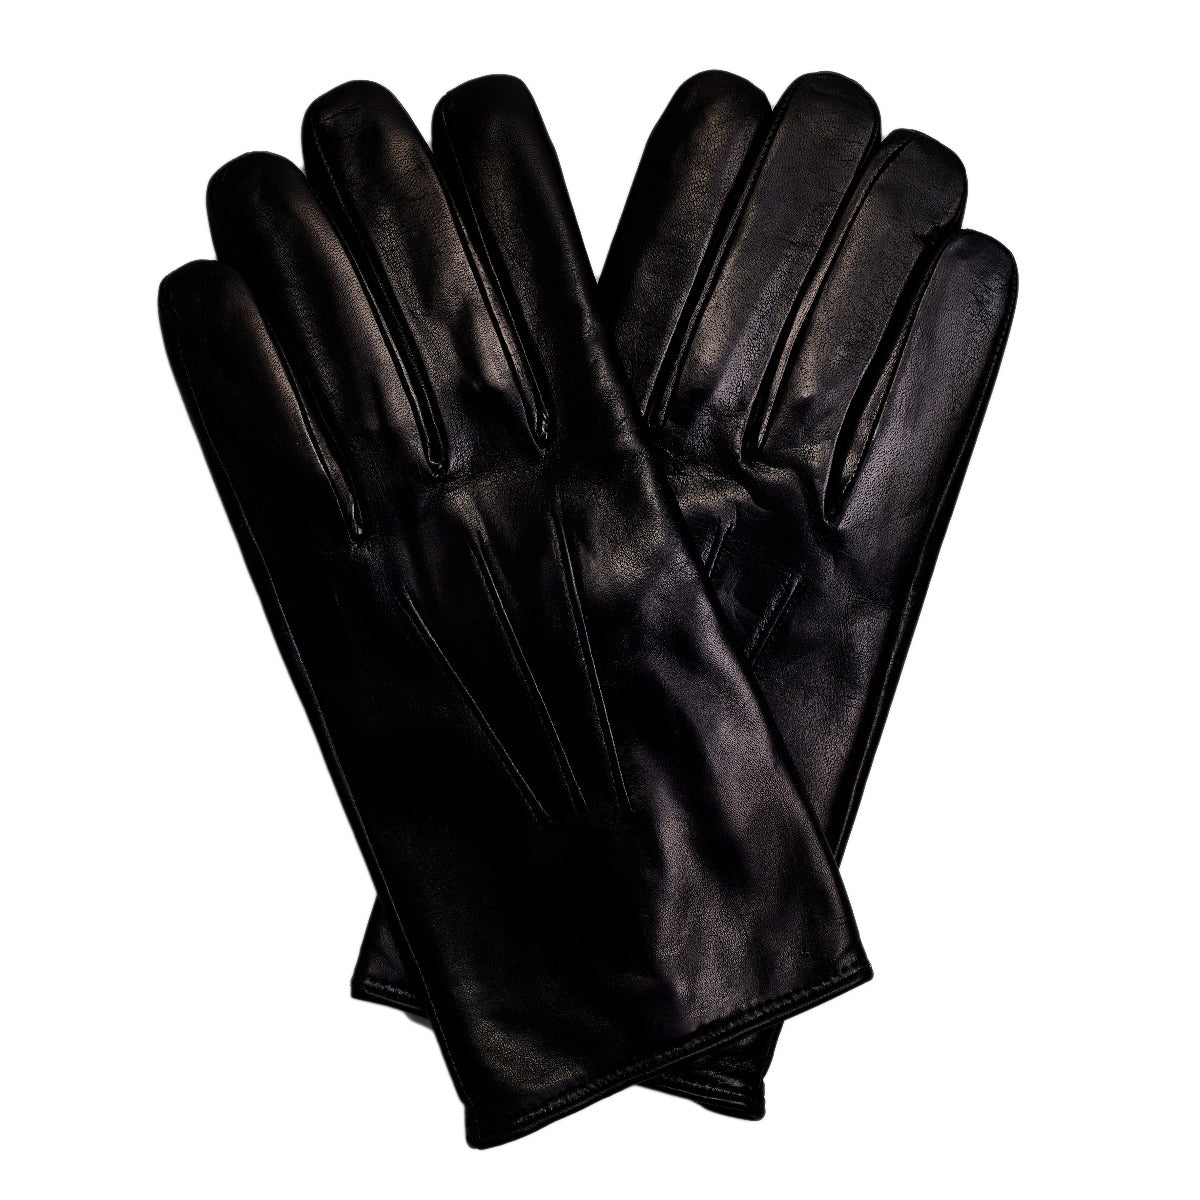 Smith + Rogue Men's Standard Issue Glove - Black - L - North 40 Outfitters